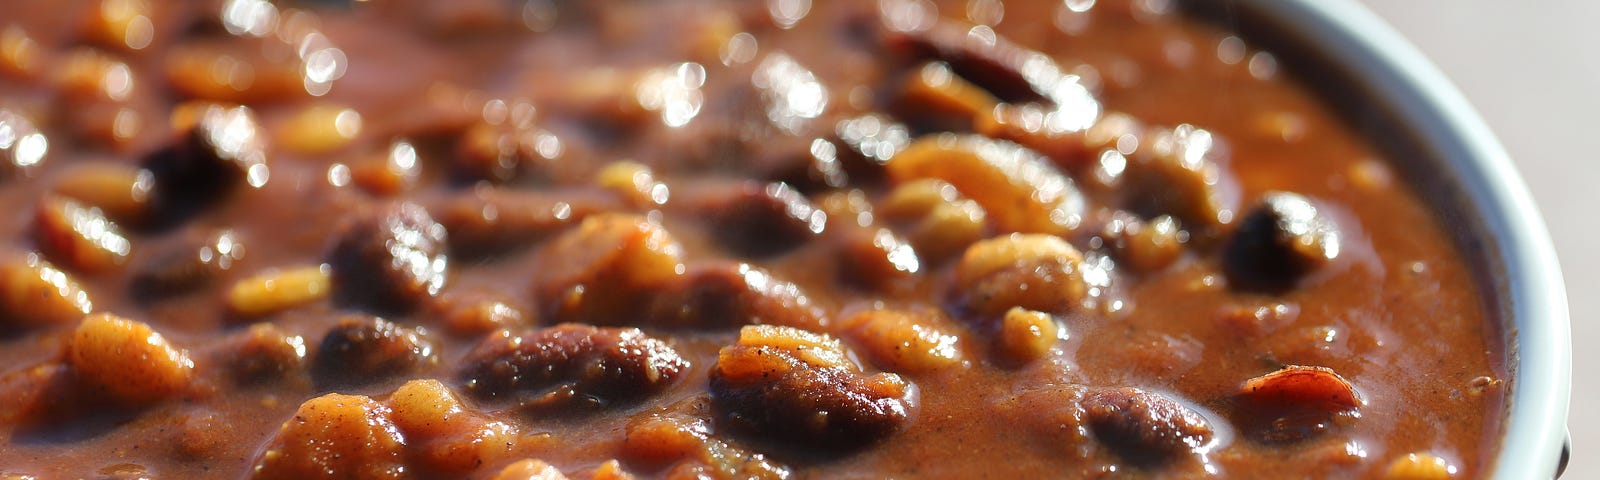 Easy, Healthy, and Delicious 3-Bean Chili